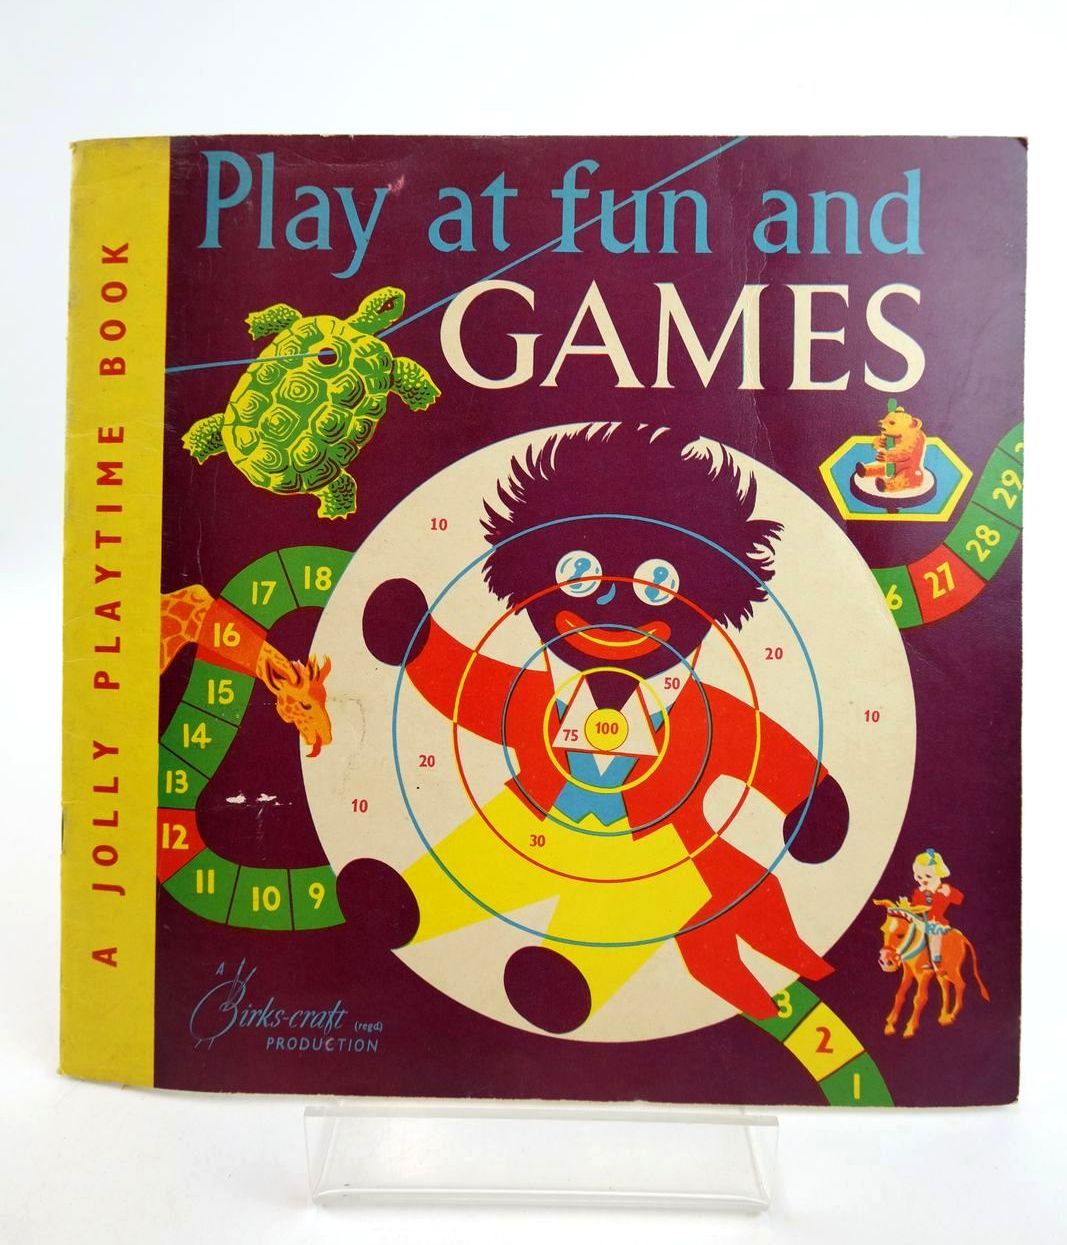 Photo of PLAY AT FUN AND GAMES - A JOLLY PLAYTIME BOOK published by Edwyn A. Birks Ltd. (STOCK CODE: 1318774)  for sale by Stella & Rose's Books